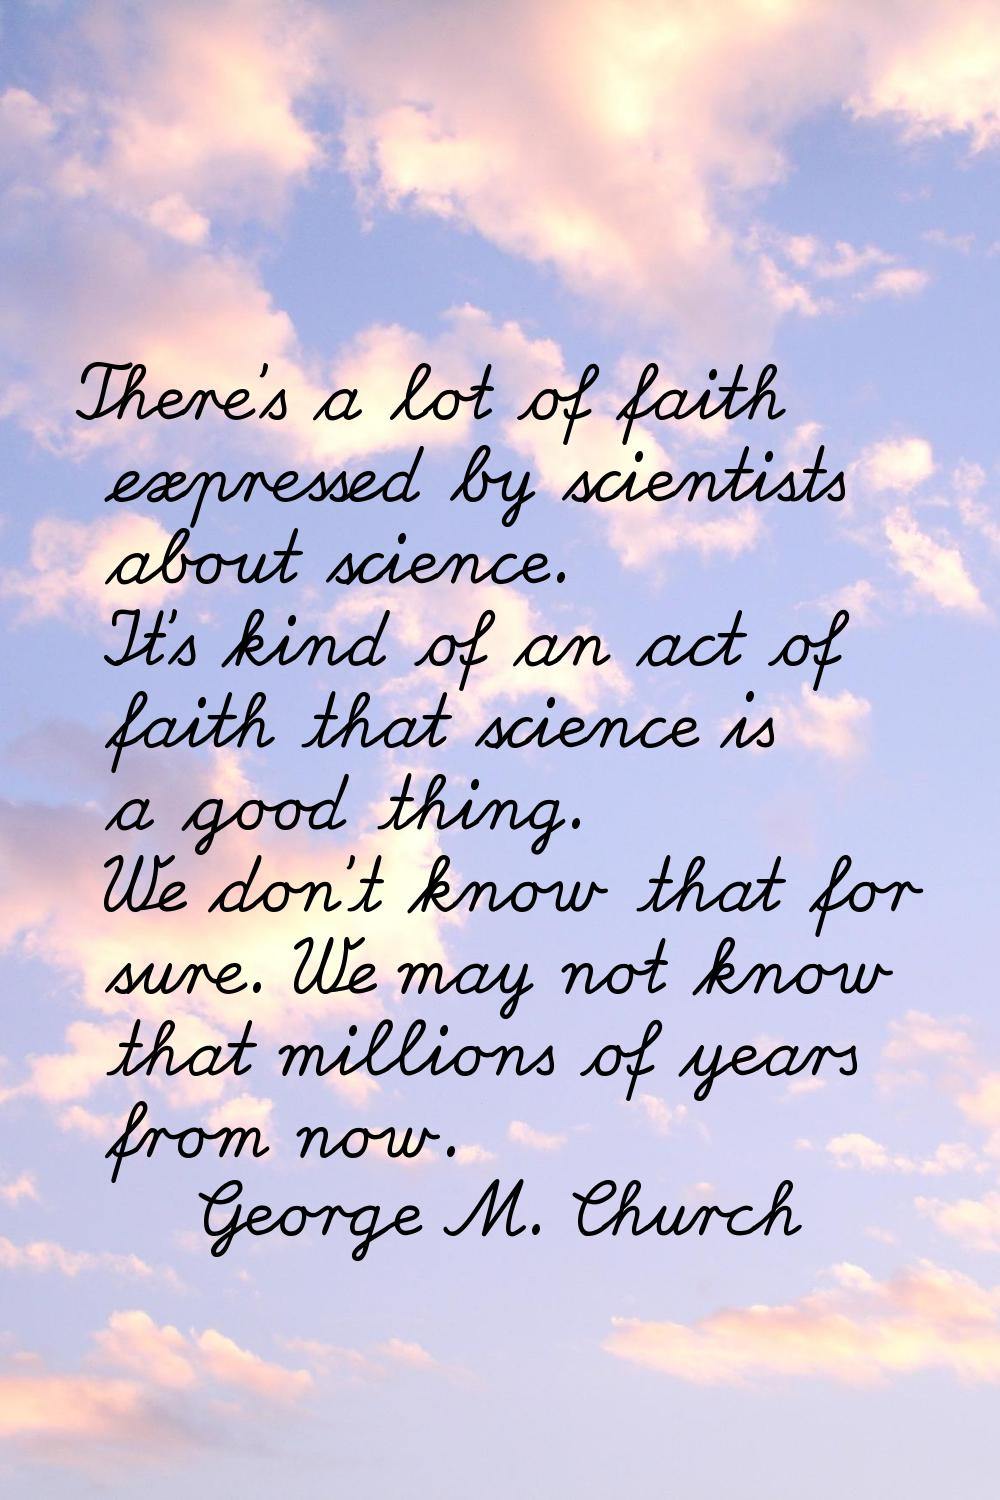 There's a lot of faith expressed by scientists about science. It's kind of an act of faith that sci